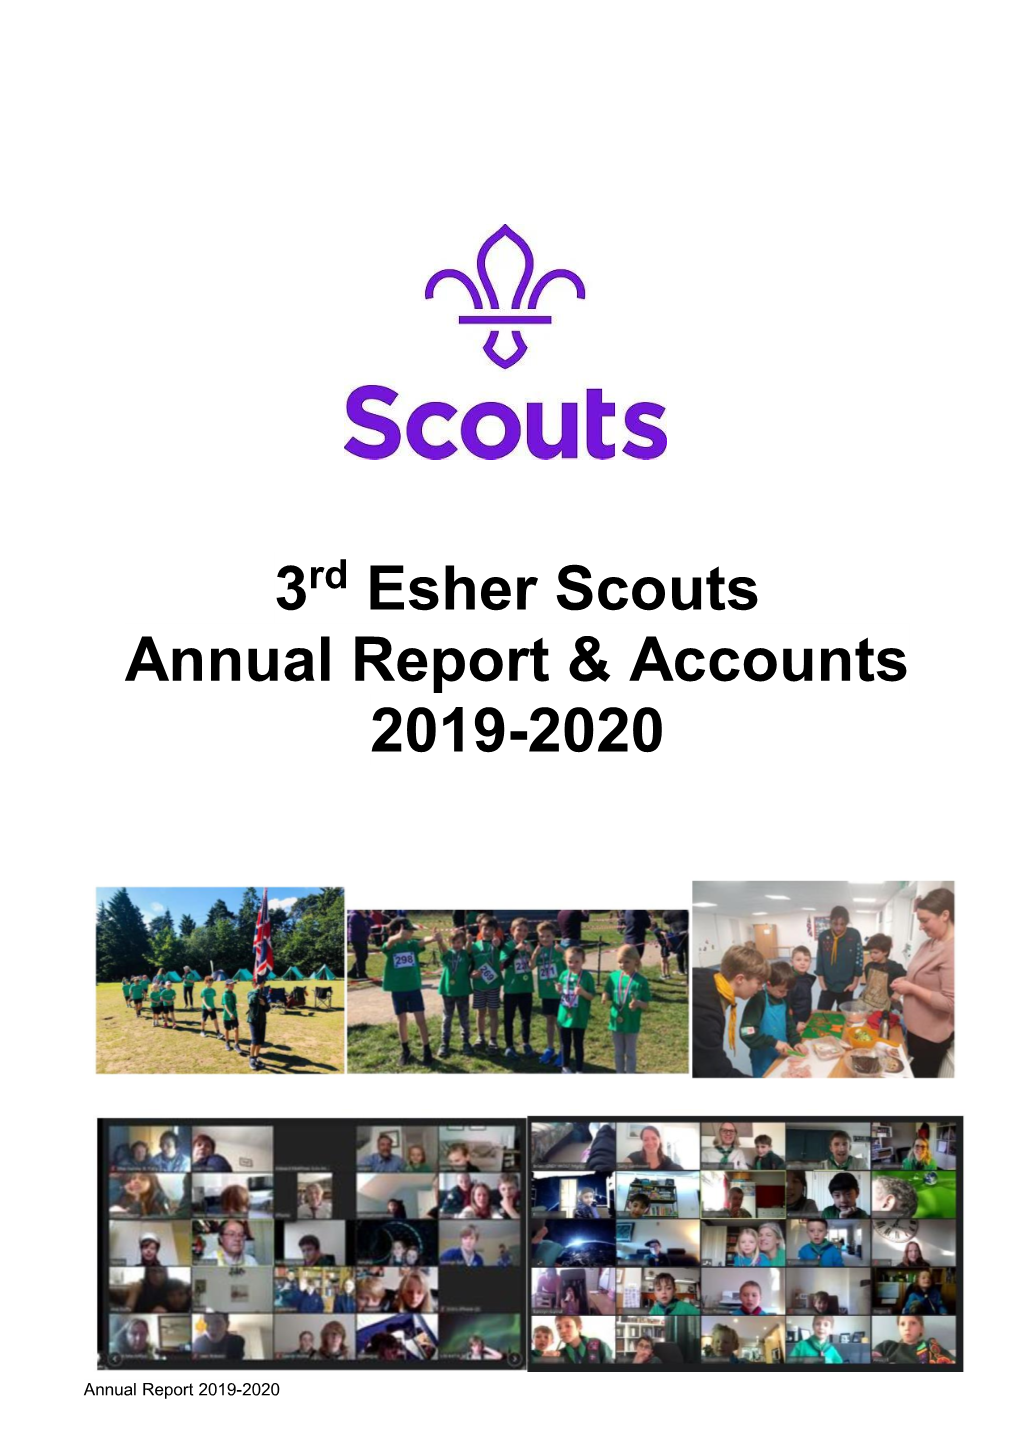 Annual Report and Accounts 2020